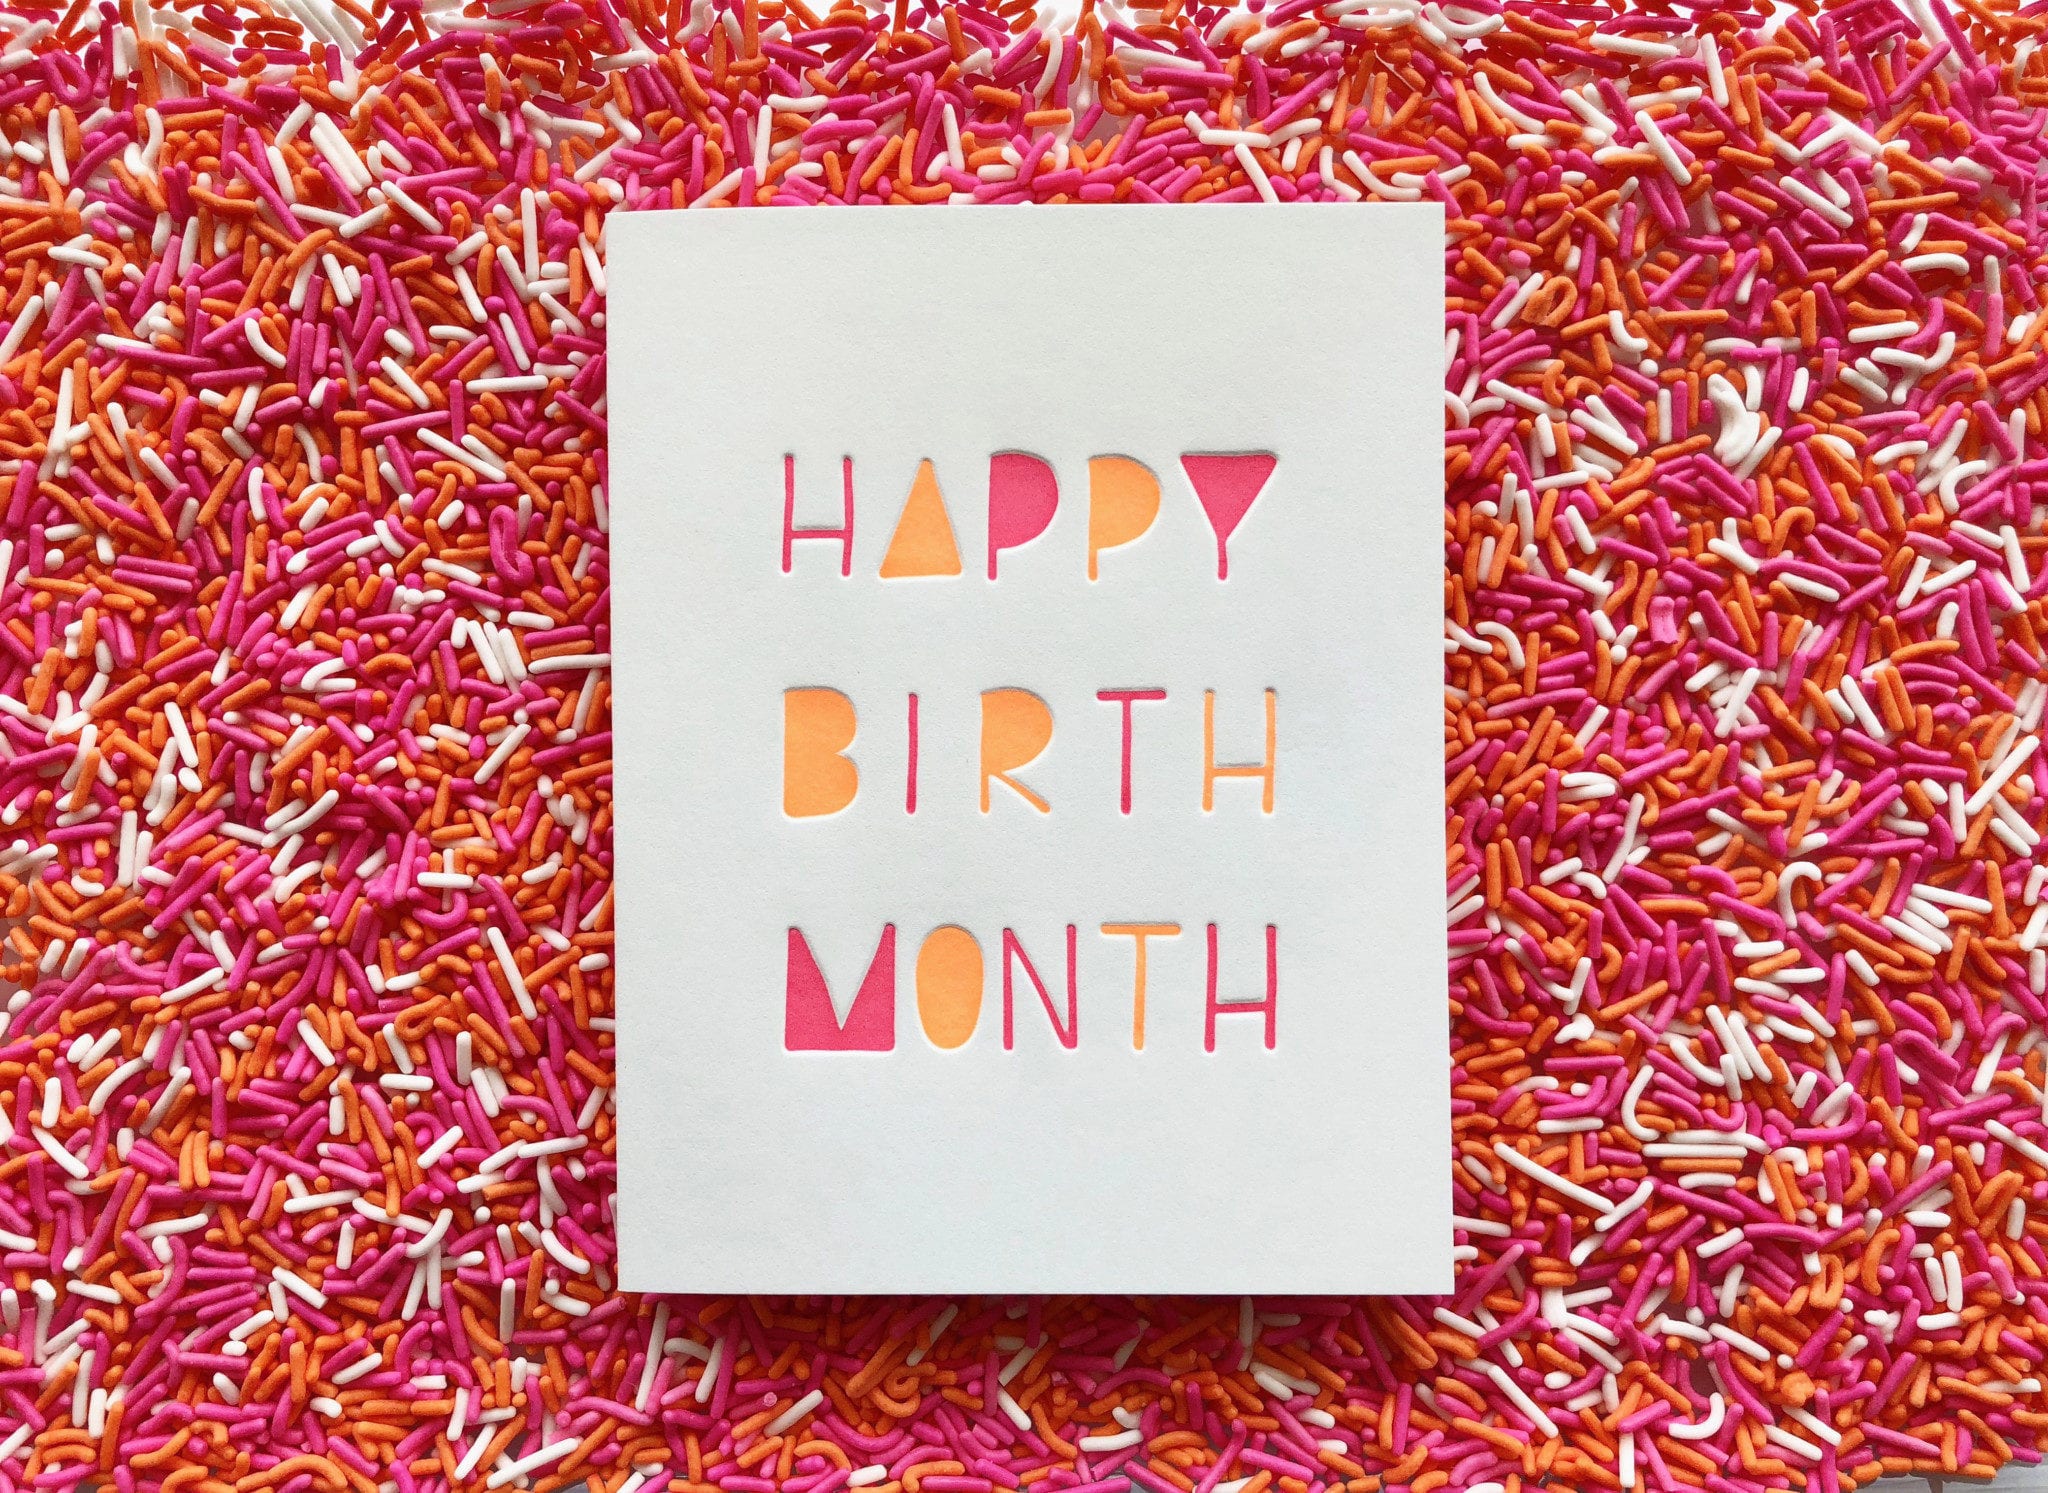 card reading happy birth month on a bed of red colored sprinkles